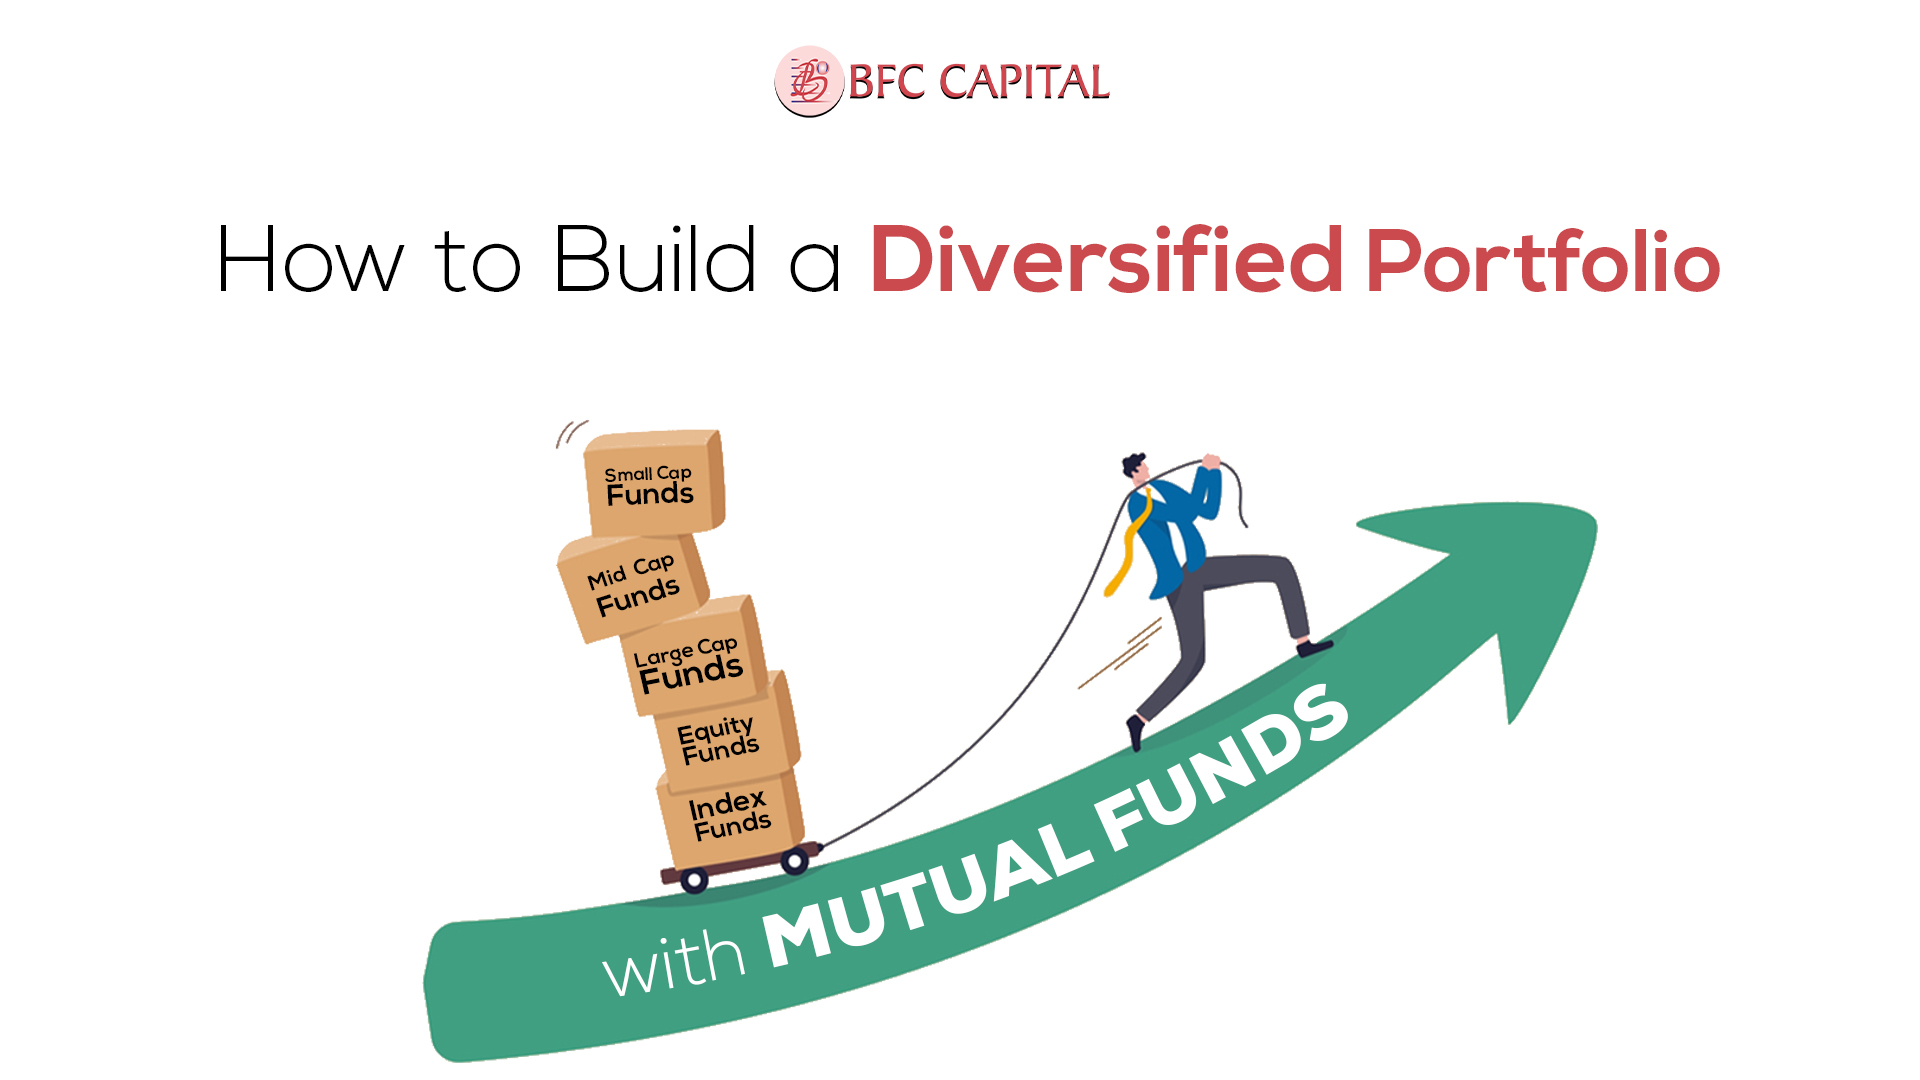 How to Build a Diversified Portfolio with Mutual Funds